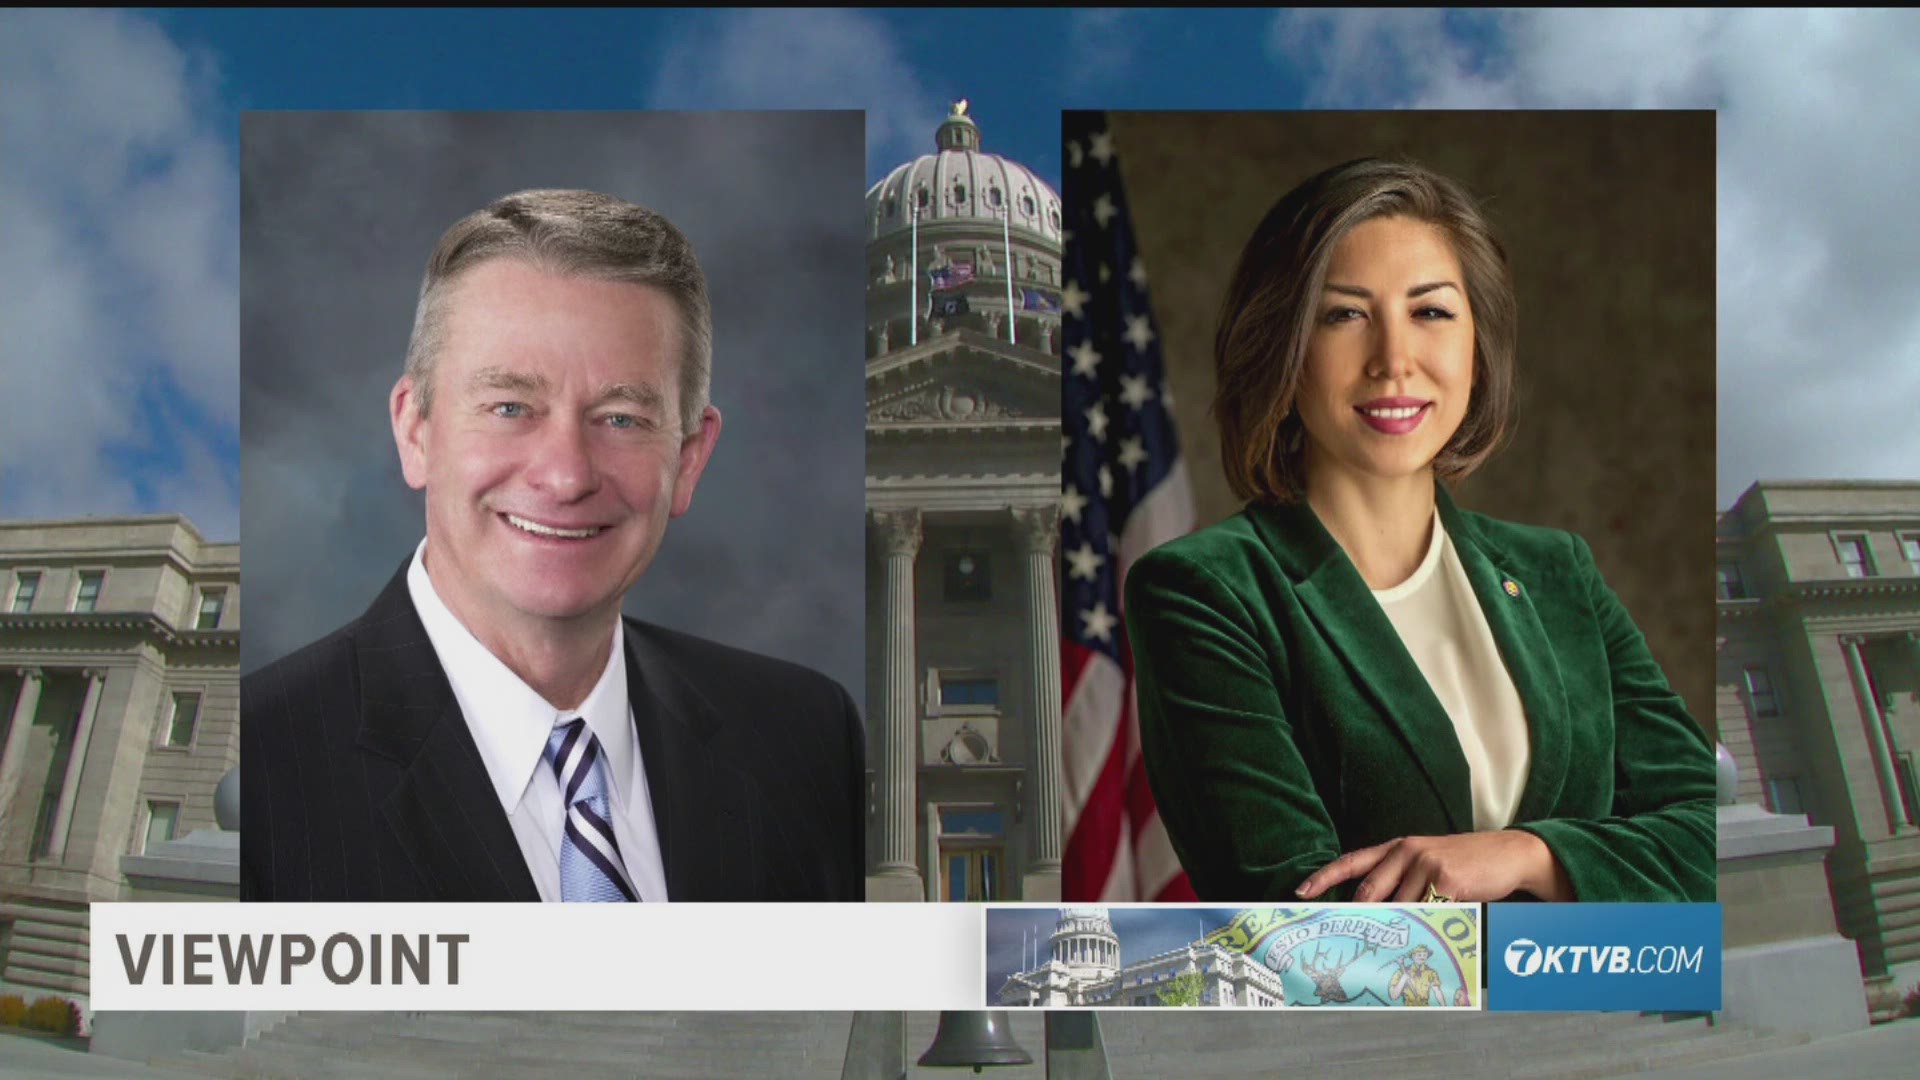 Registered Republicans outnumber Democrats by more than 4 to 1 in Idaho. That's one challenge Democratic gubernatorial candidate Paulette Jordan faces heading into the November election against Lt. Gov. Brad Little. On Viewpoint, Boise State University Po